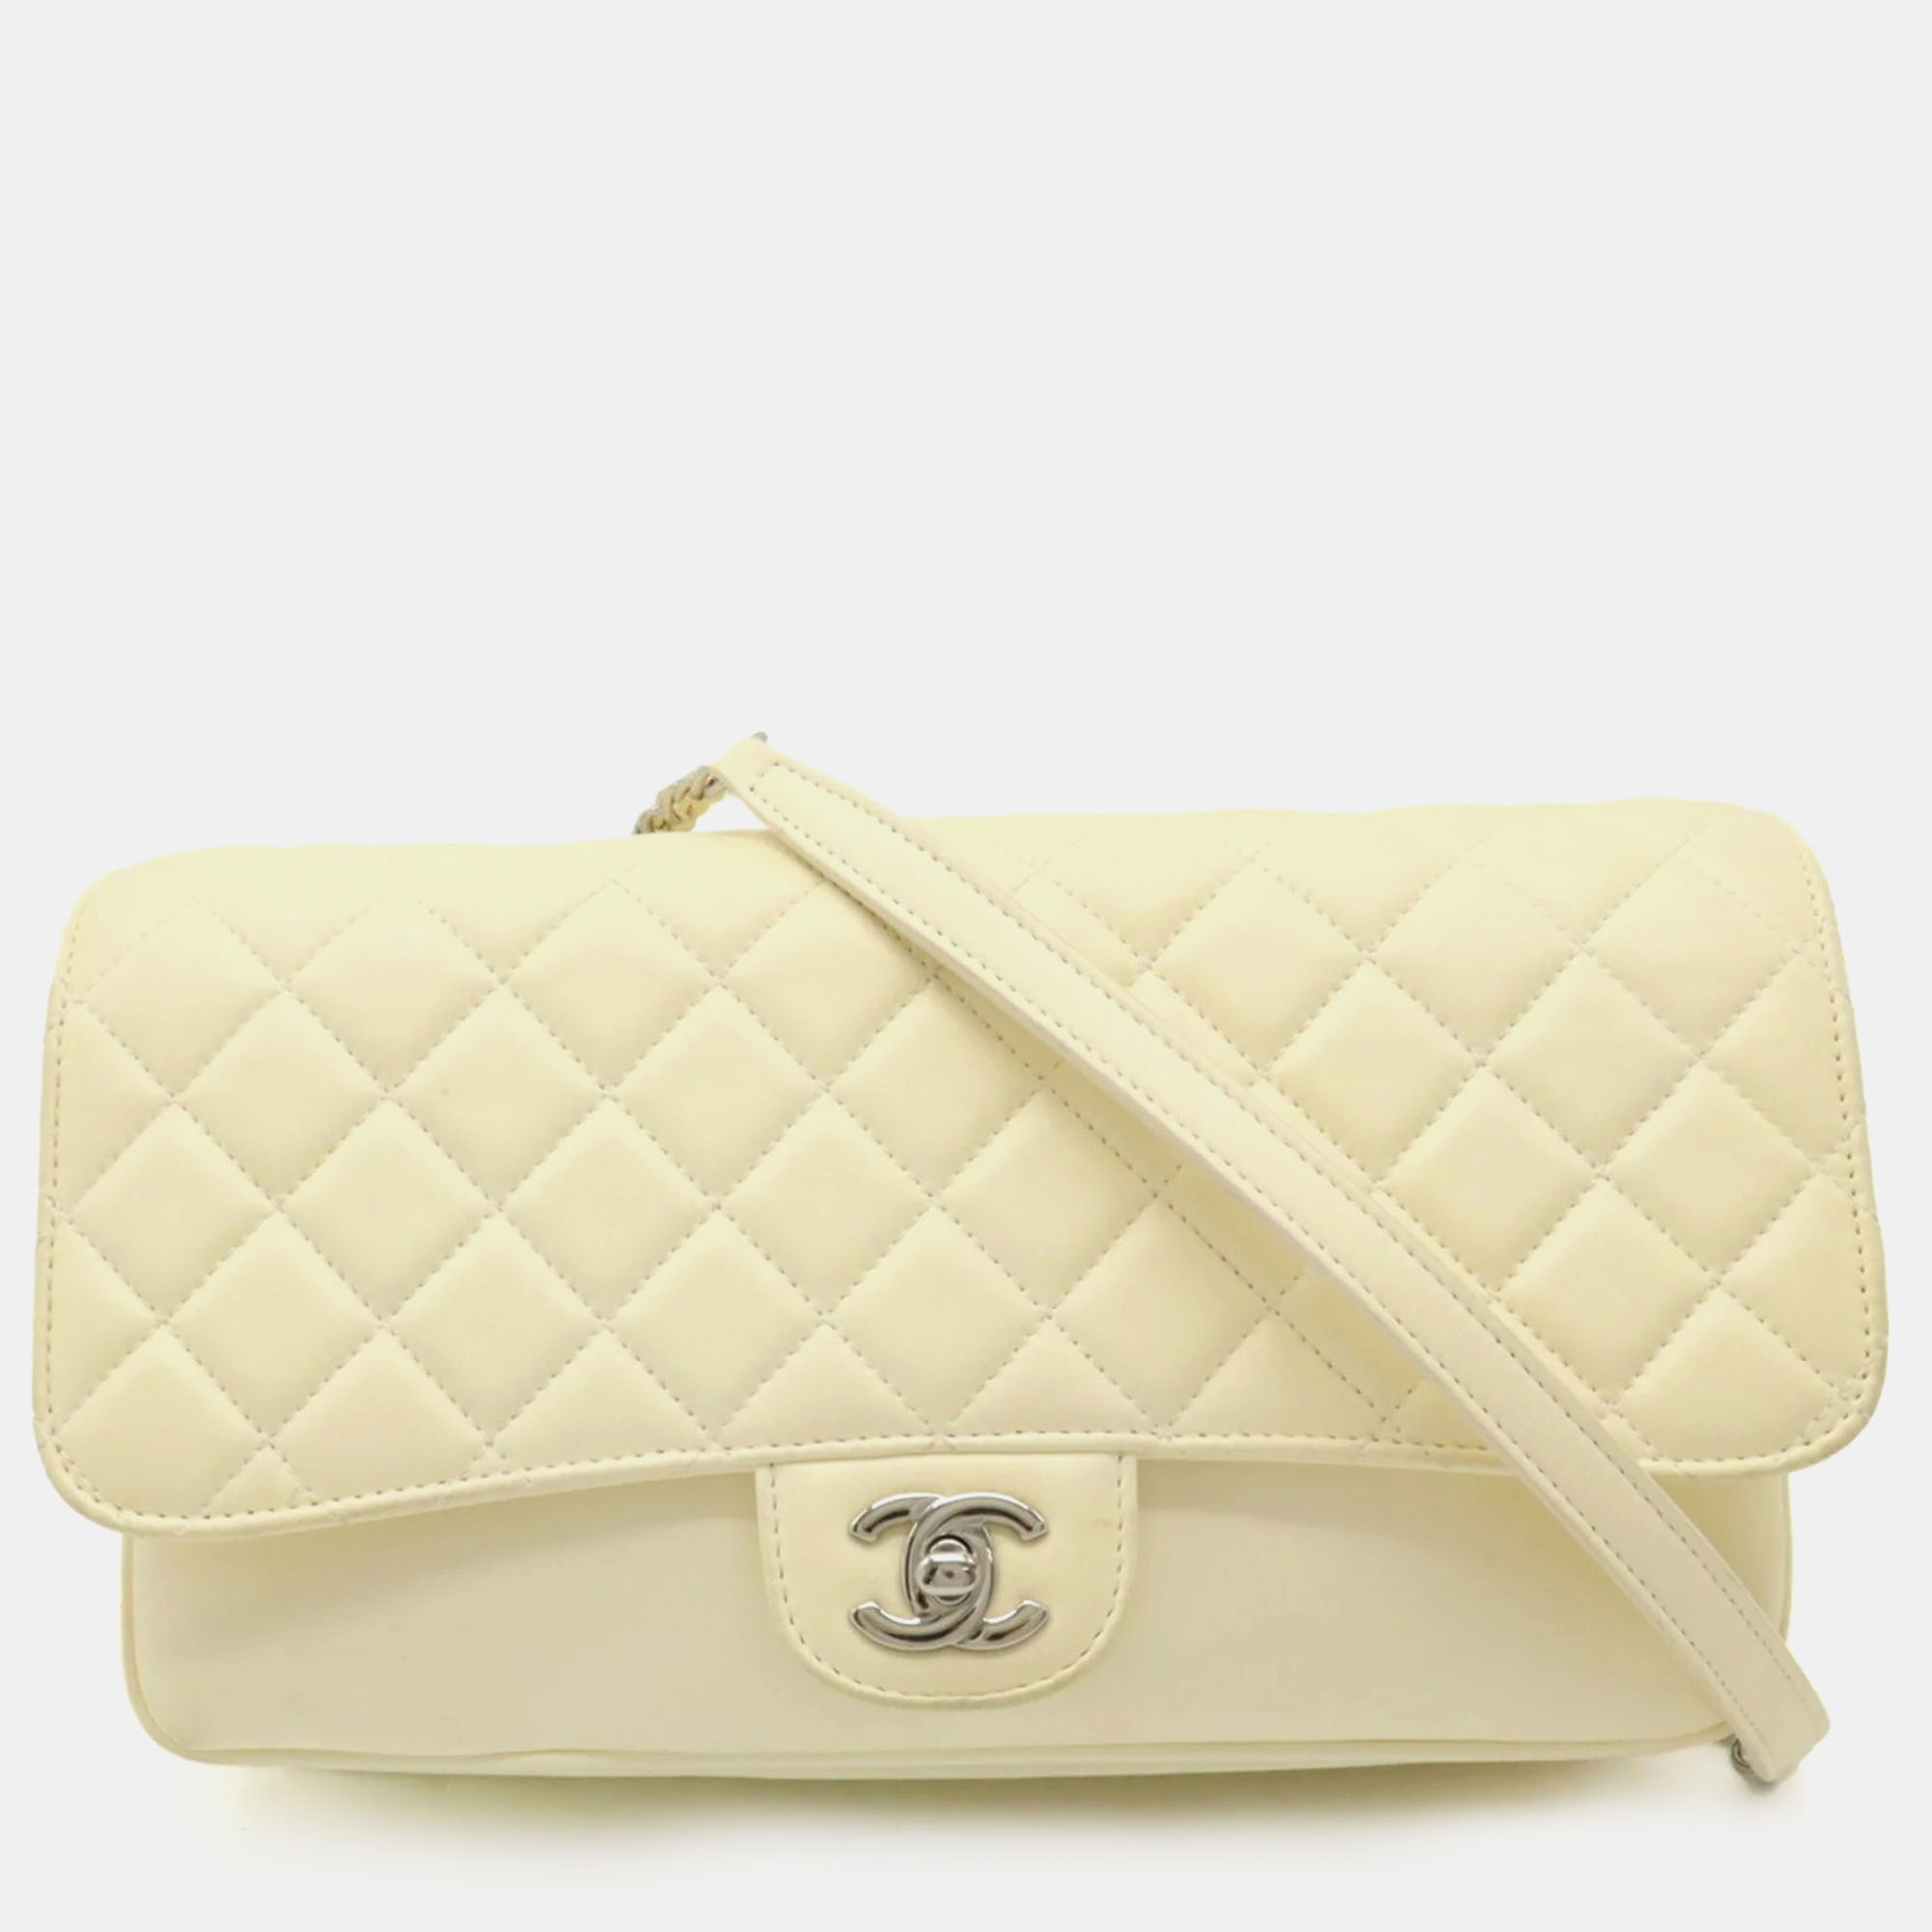 Chanel cream leather quilted flap bag